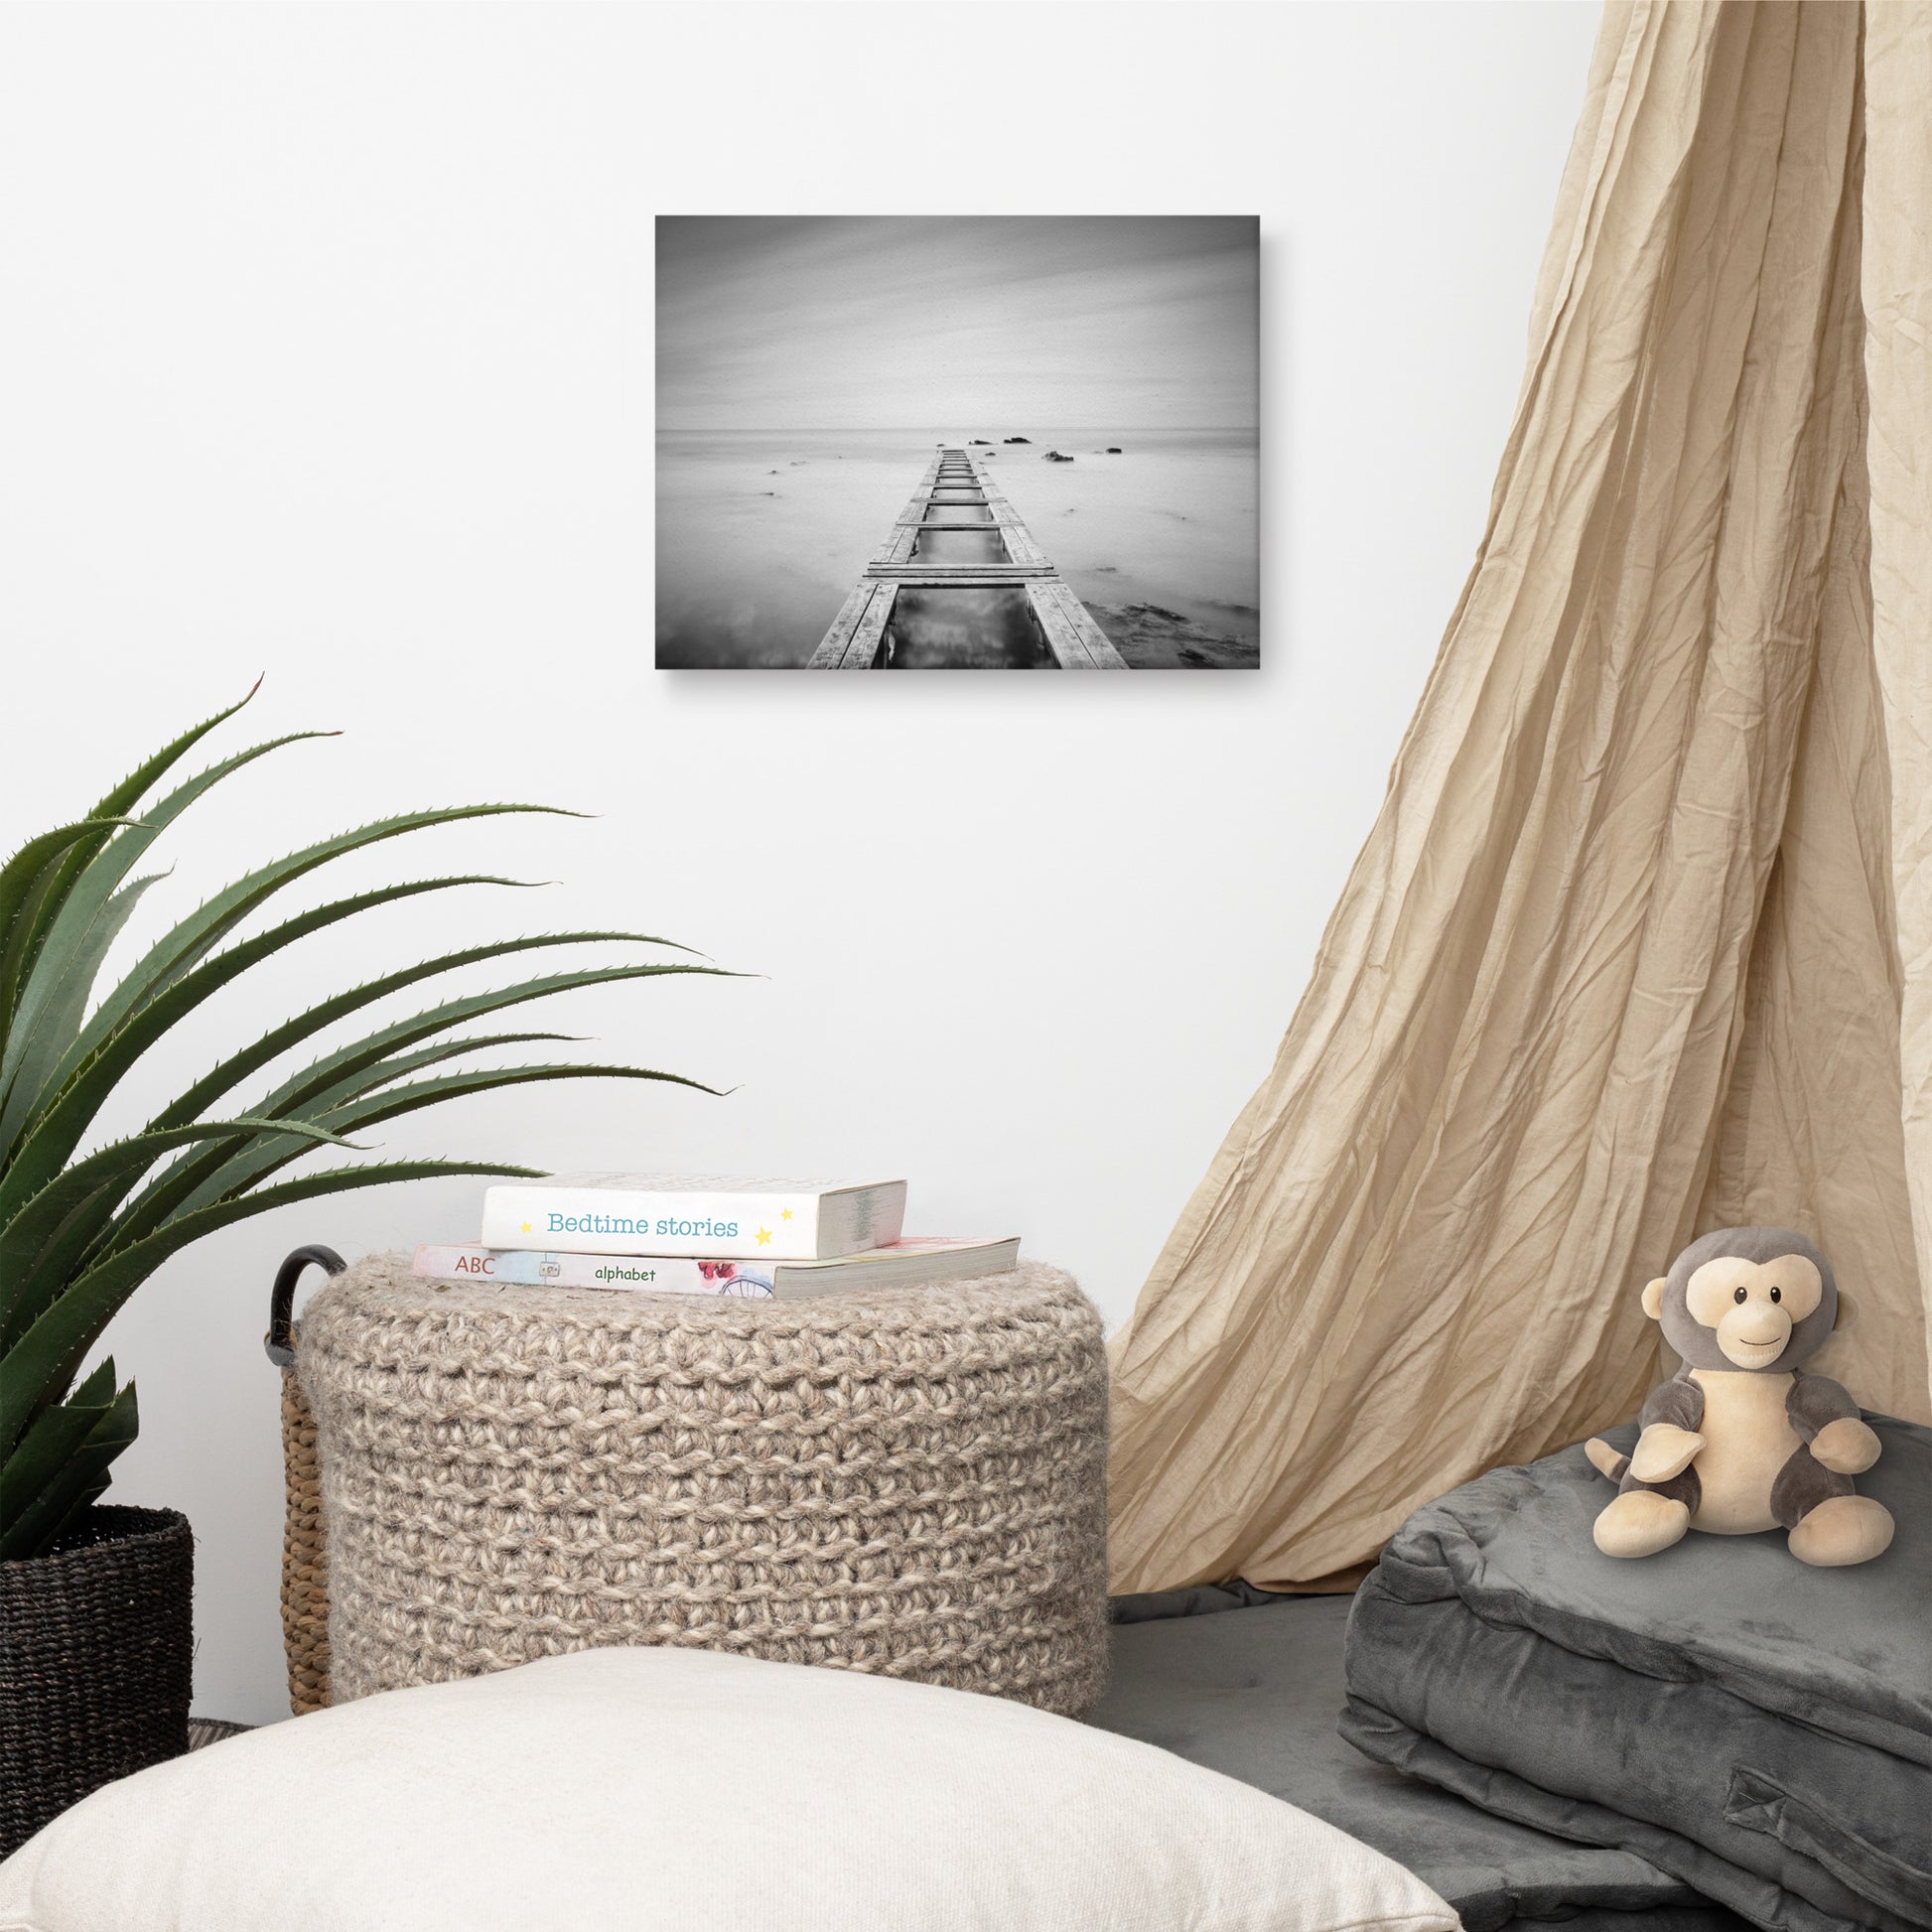 Moody Ocean and Sky Wooden Pier Landscape Photo Canvas Wall Art Prints